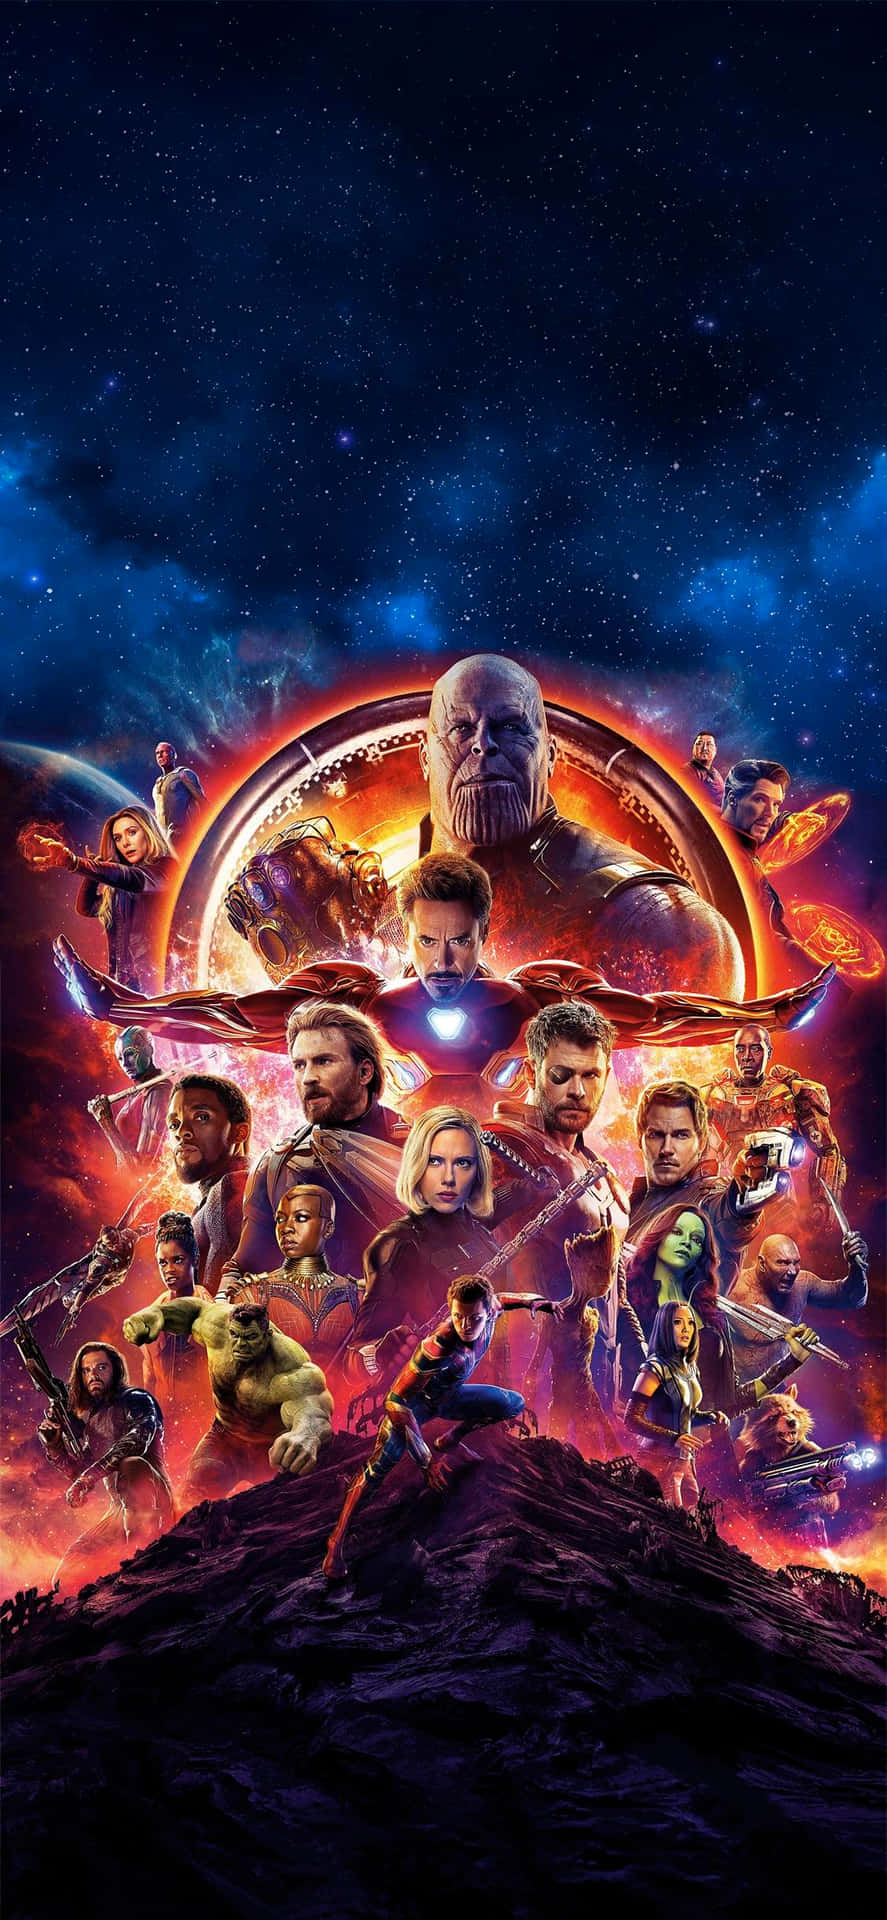 Get your silver screen superhero movie look on your mobile device with this Avengers Endgame themed iPhone wallpaper Wallpaper